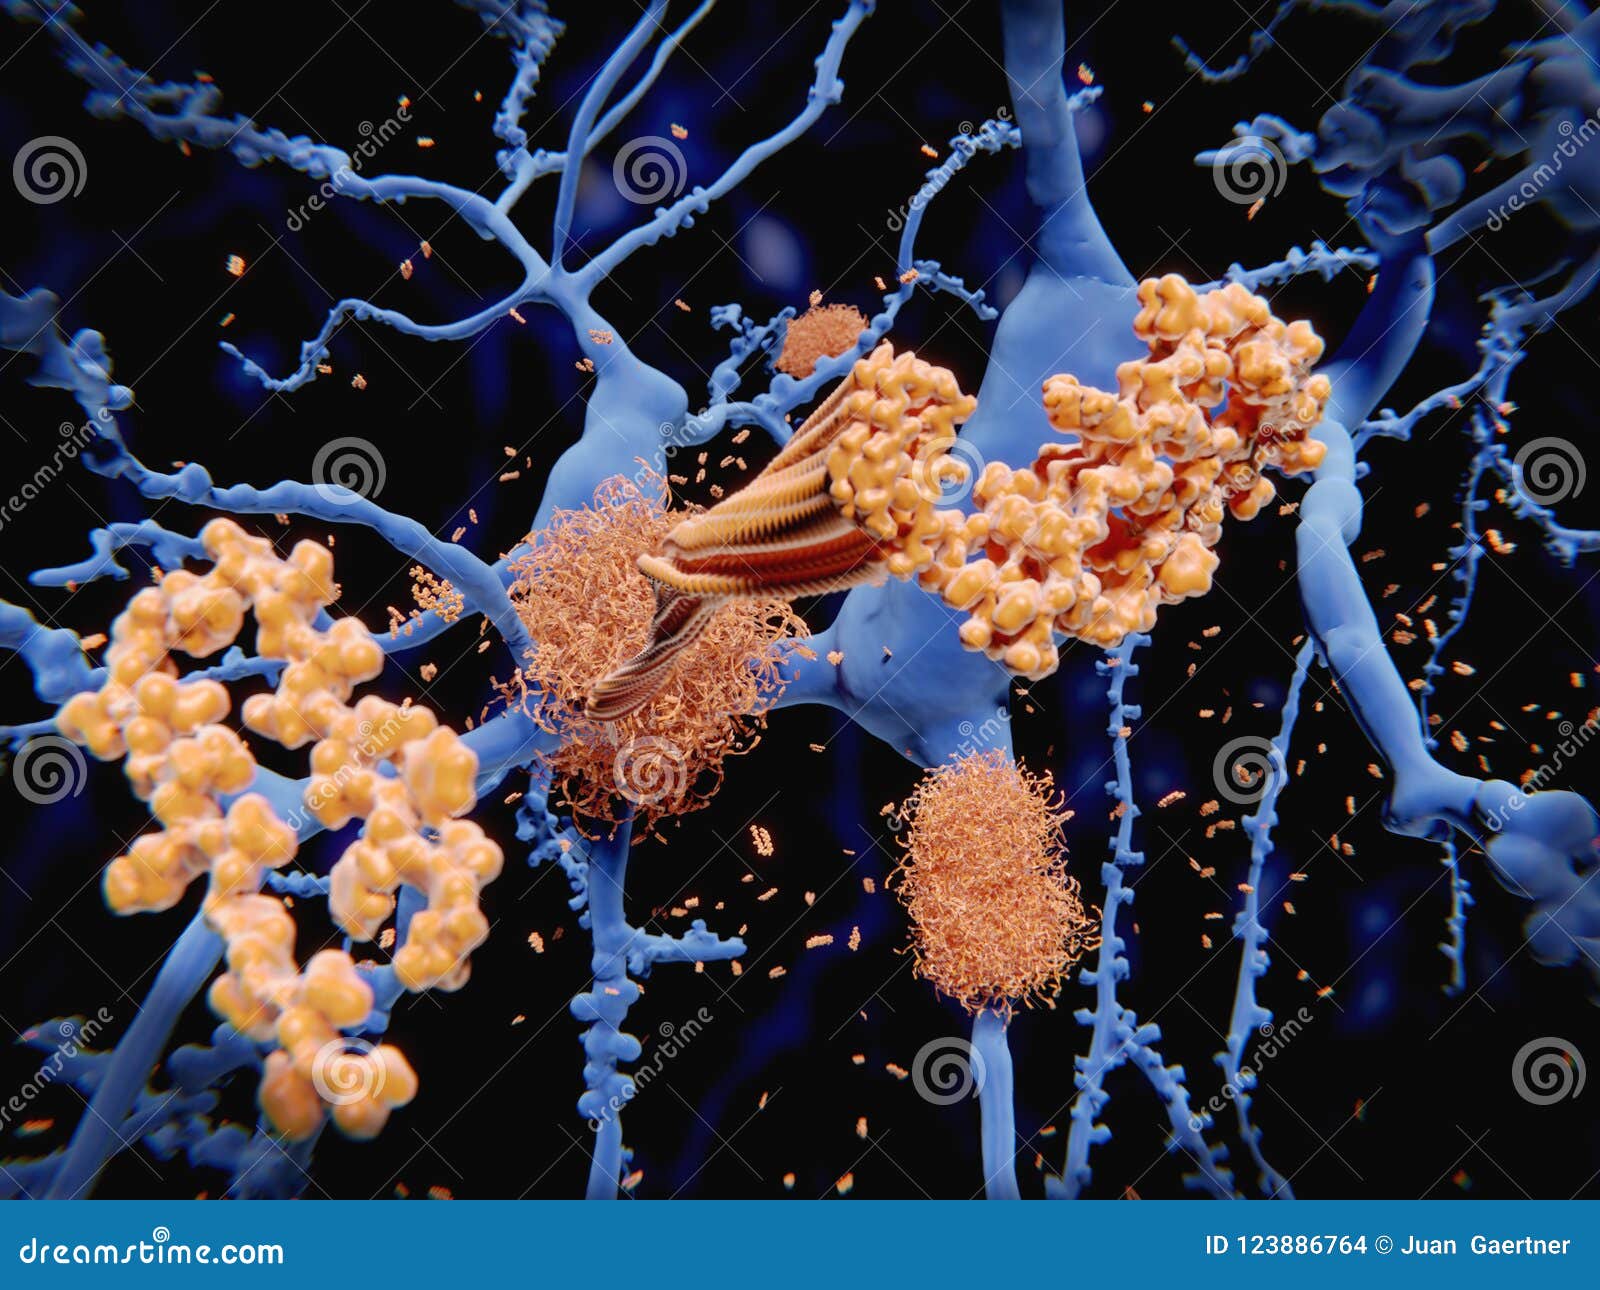 alzheimer`s disease: the amyloid-beta peptide accumulates to amy